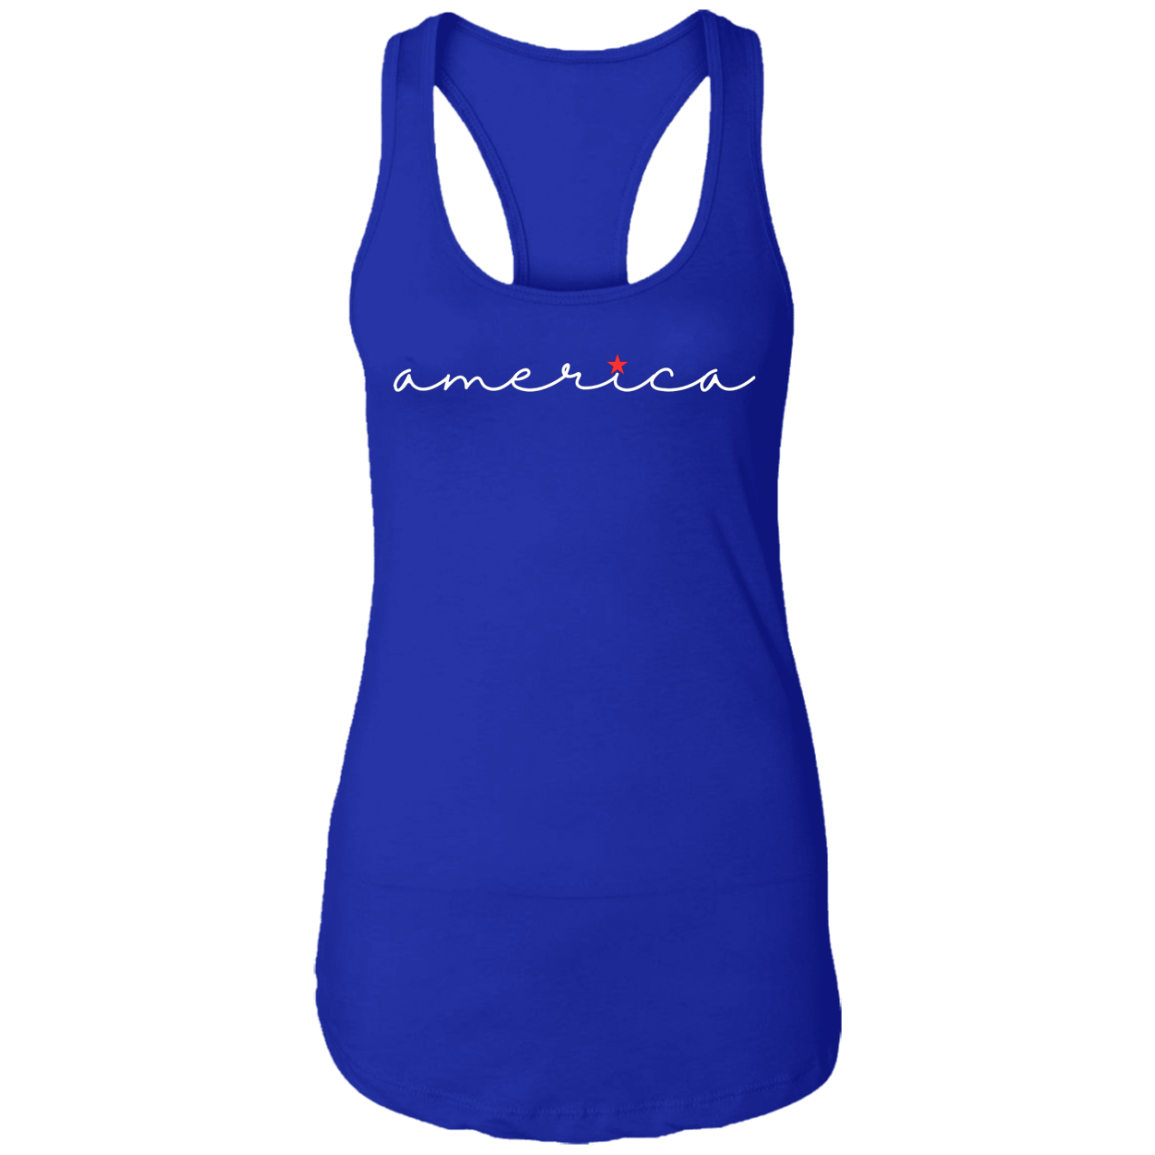 America with a Star Tank Top - Thoughtful Blossom